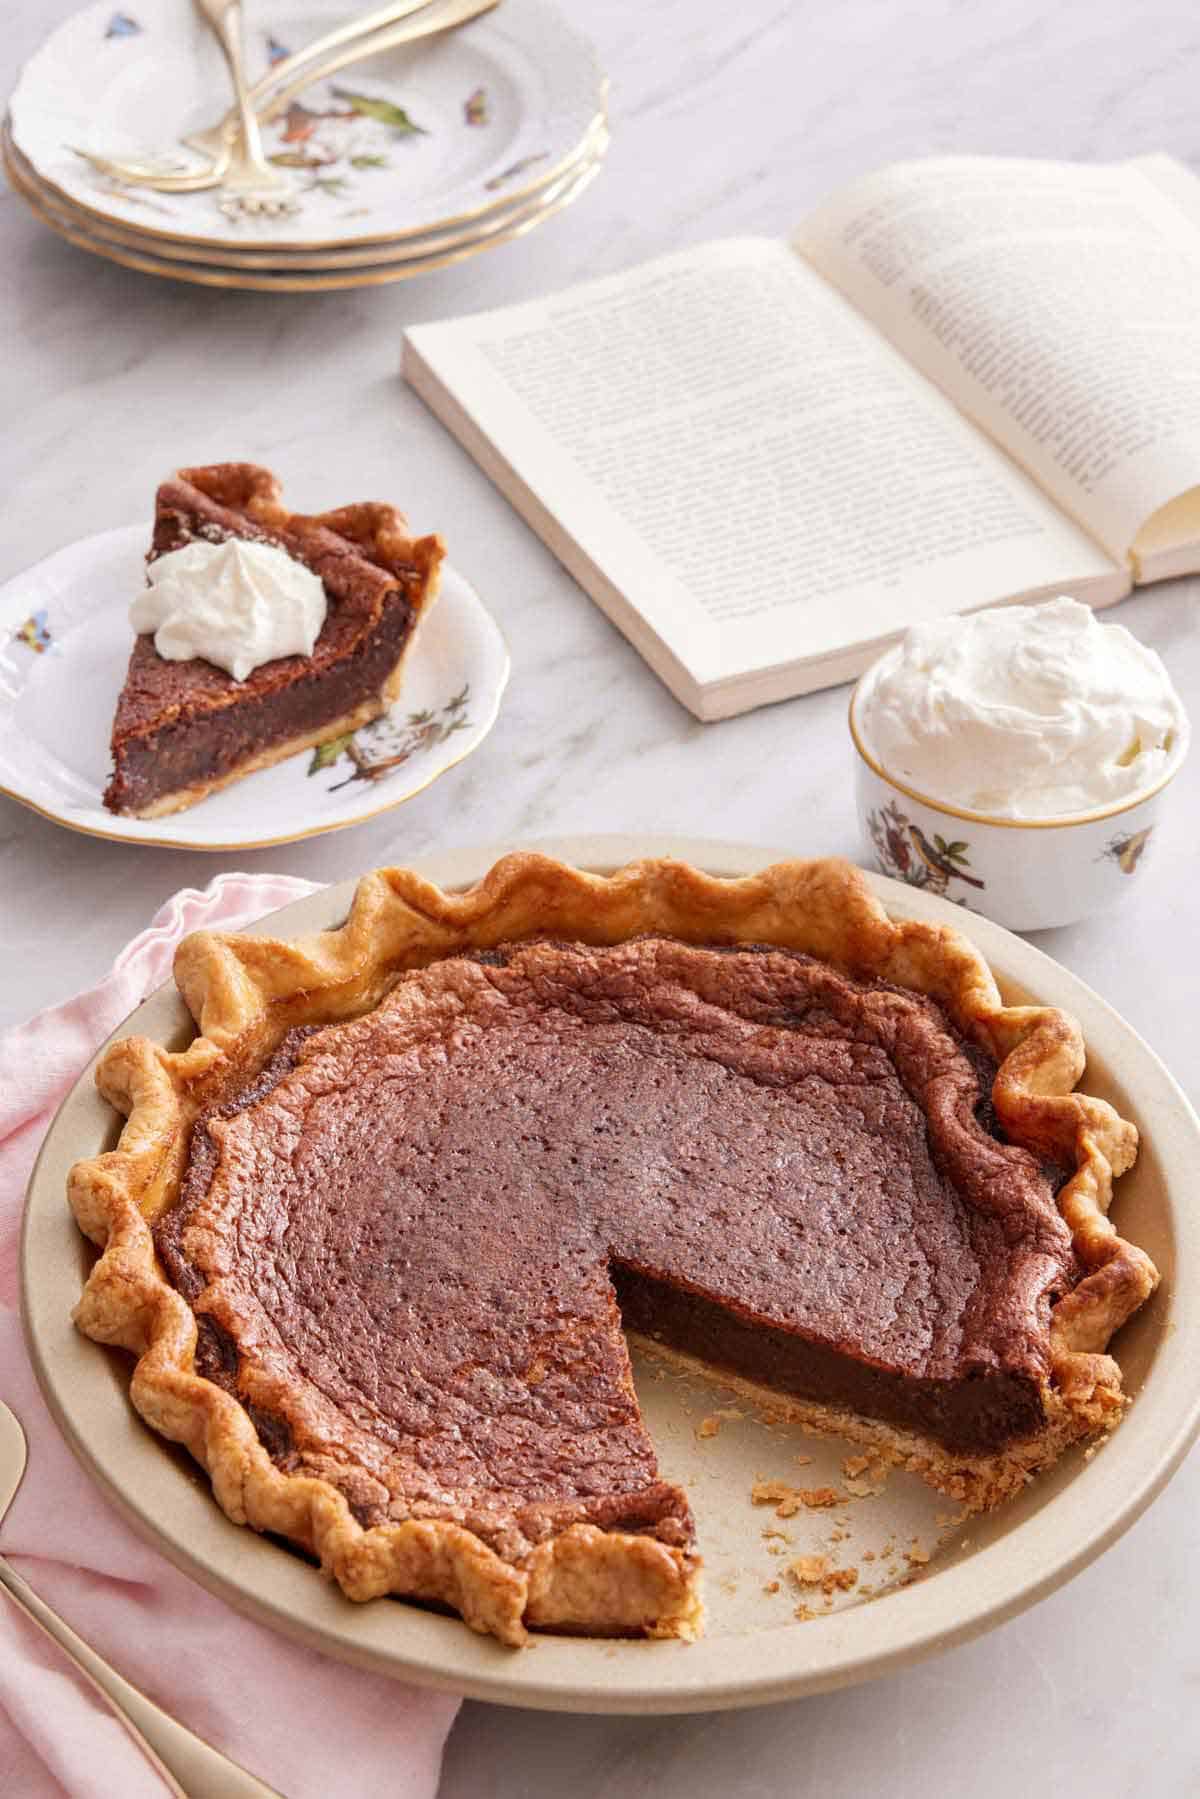 A pie dish with a chocolate chess pie with a slice cut out and plated in the background along with a bowl of whipped cream and an opened book.